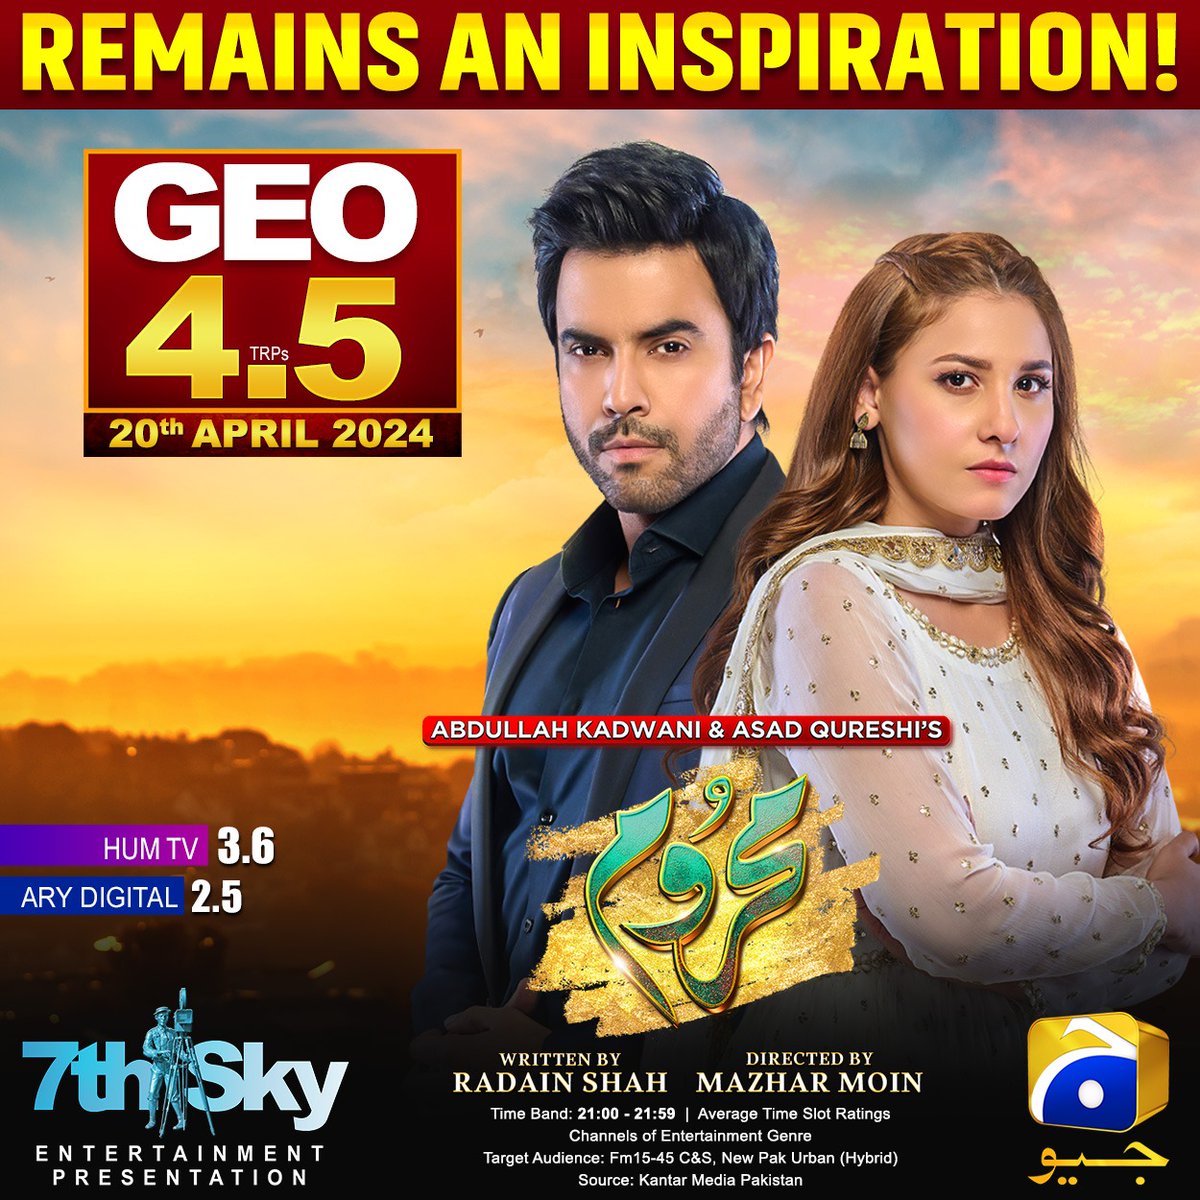 #Mehroom beats the other local drama serials by securing the highest TRPs once again. 

Watch #Mehroom daily at 9:00 PM only on Geo Entertainment.

#GeoEntertainment #GeoTV #HarPalGeo #7thSkyEntertainment #AbdullahKadwani #AsadQureshi #MazharMoin #RadainShah